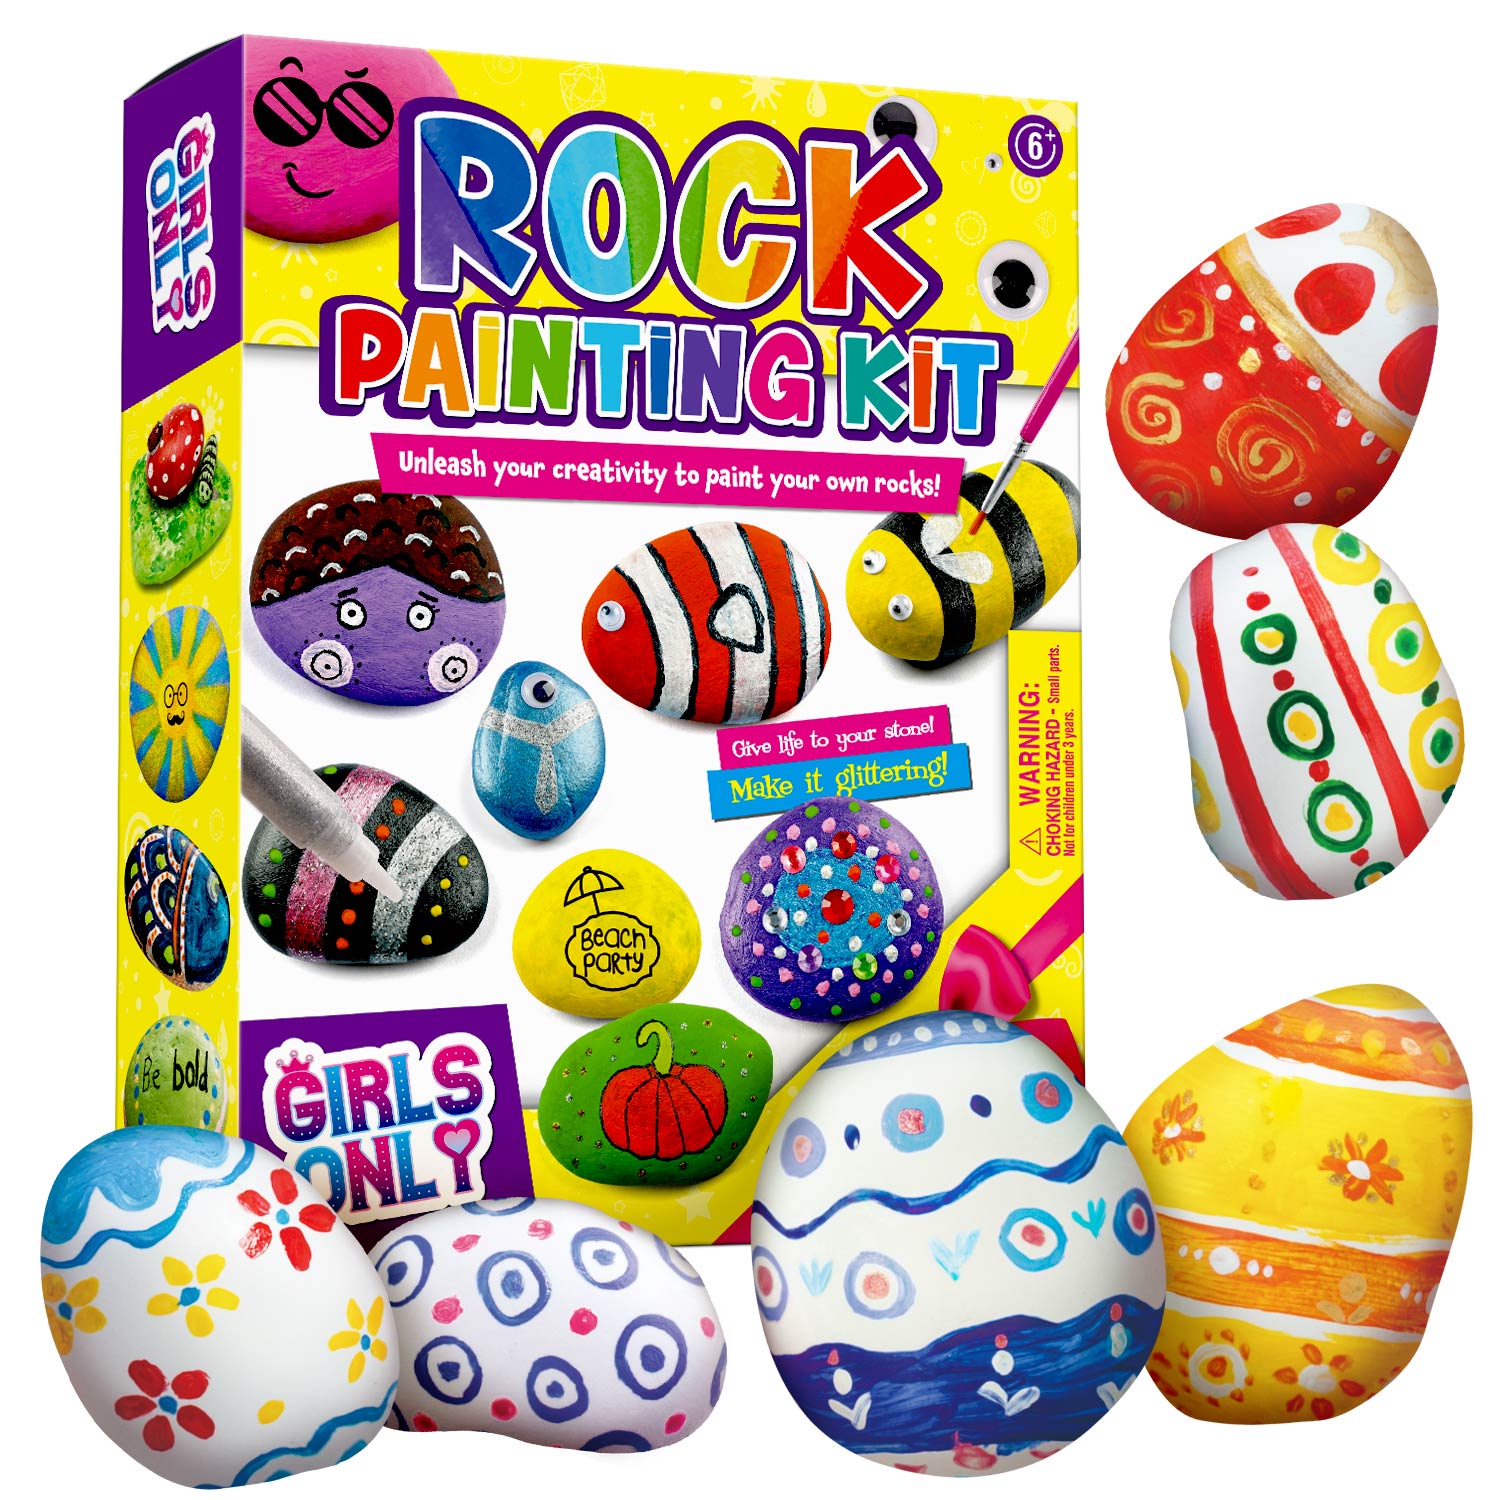 Arts & Crafts Supplies Set for Girls & Boys Ages 6-12 - Educational Art  Supplies for Painting Rocks, Fun Toys & Games Ideas - Arts and Crafts for  Kids - China Painting